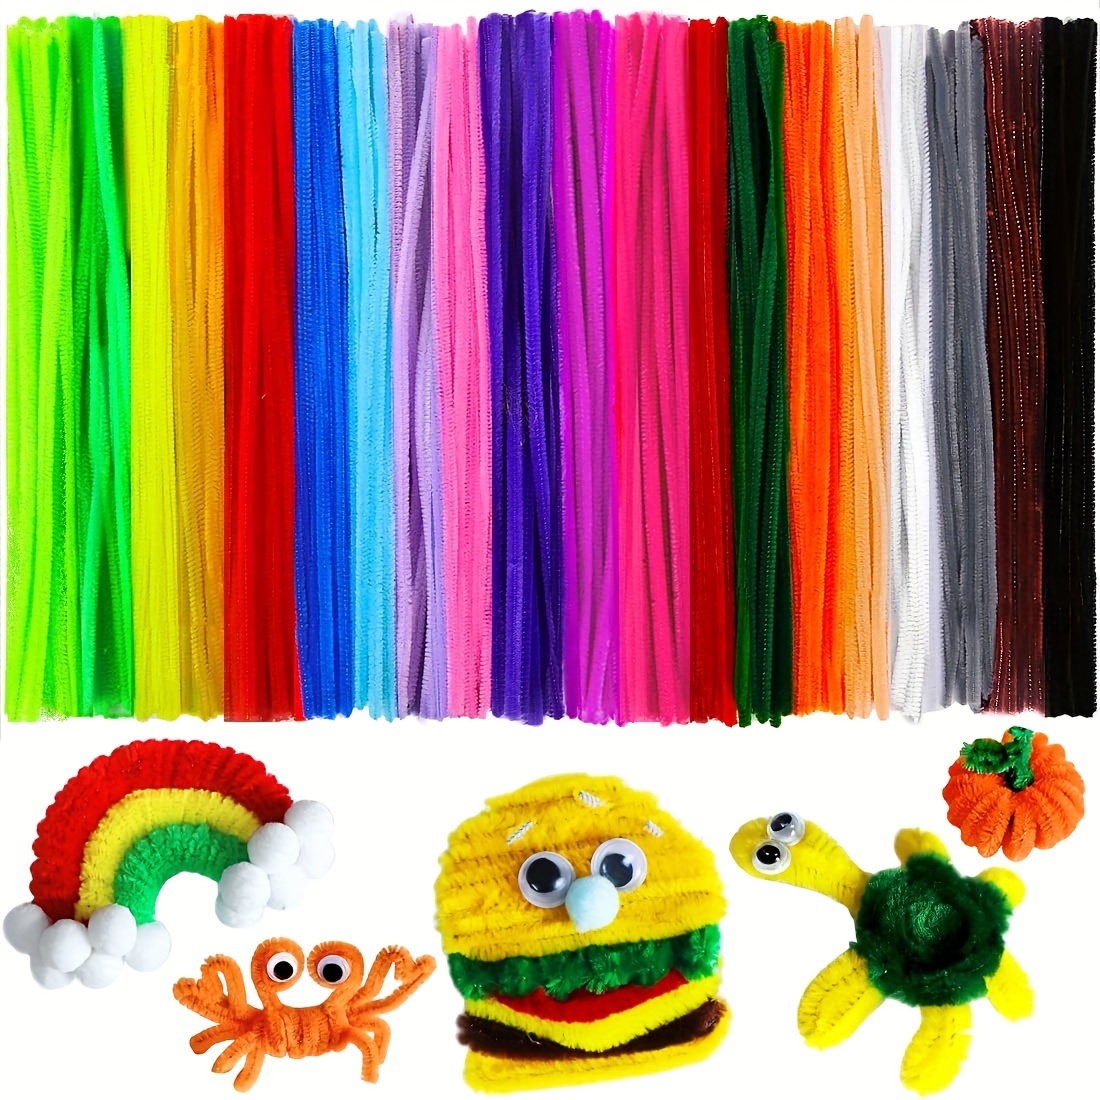 1 Set Pipe Cleaners Crafts Bendable Wire Chenille Stems DIY Tulip Bouquet  Making Kit Kids Girl DIY Flower Art Project Craft - AliExpress